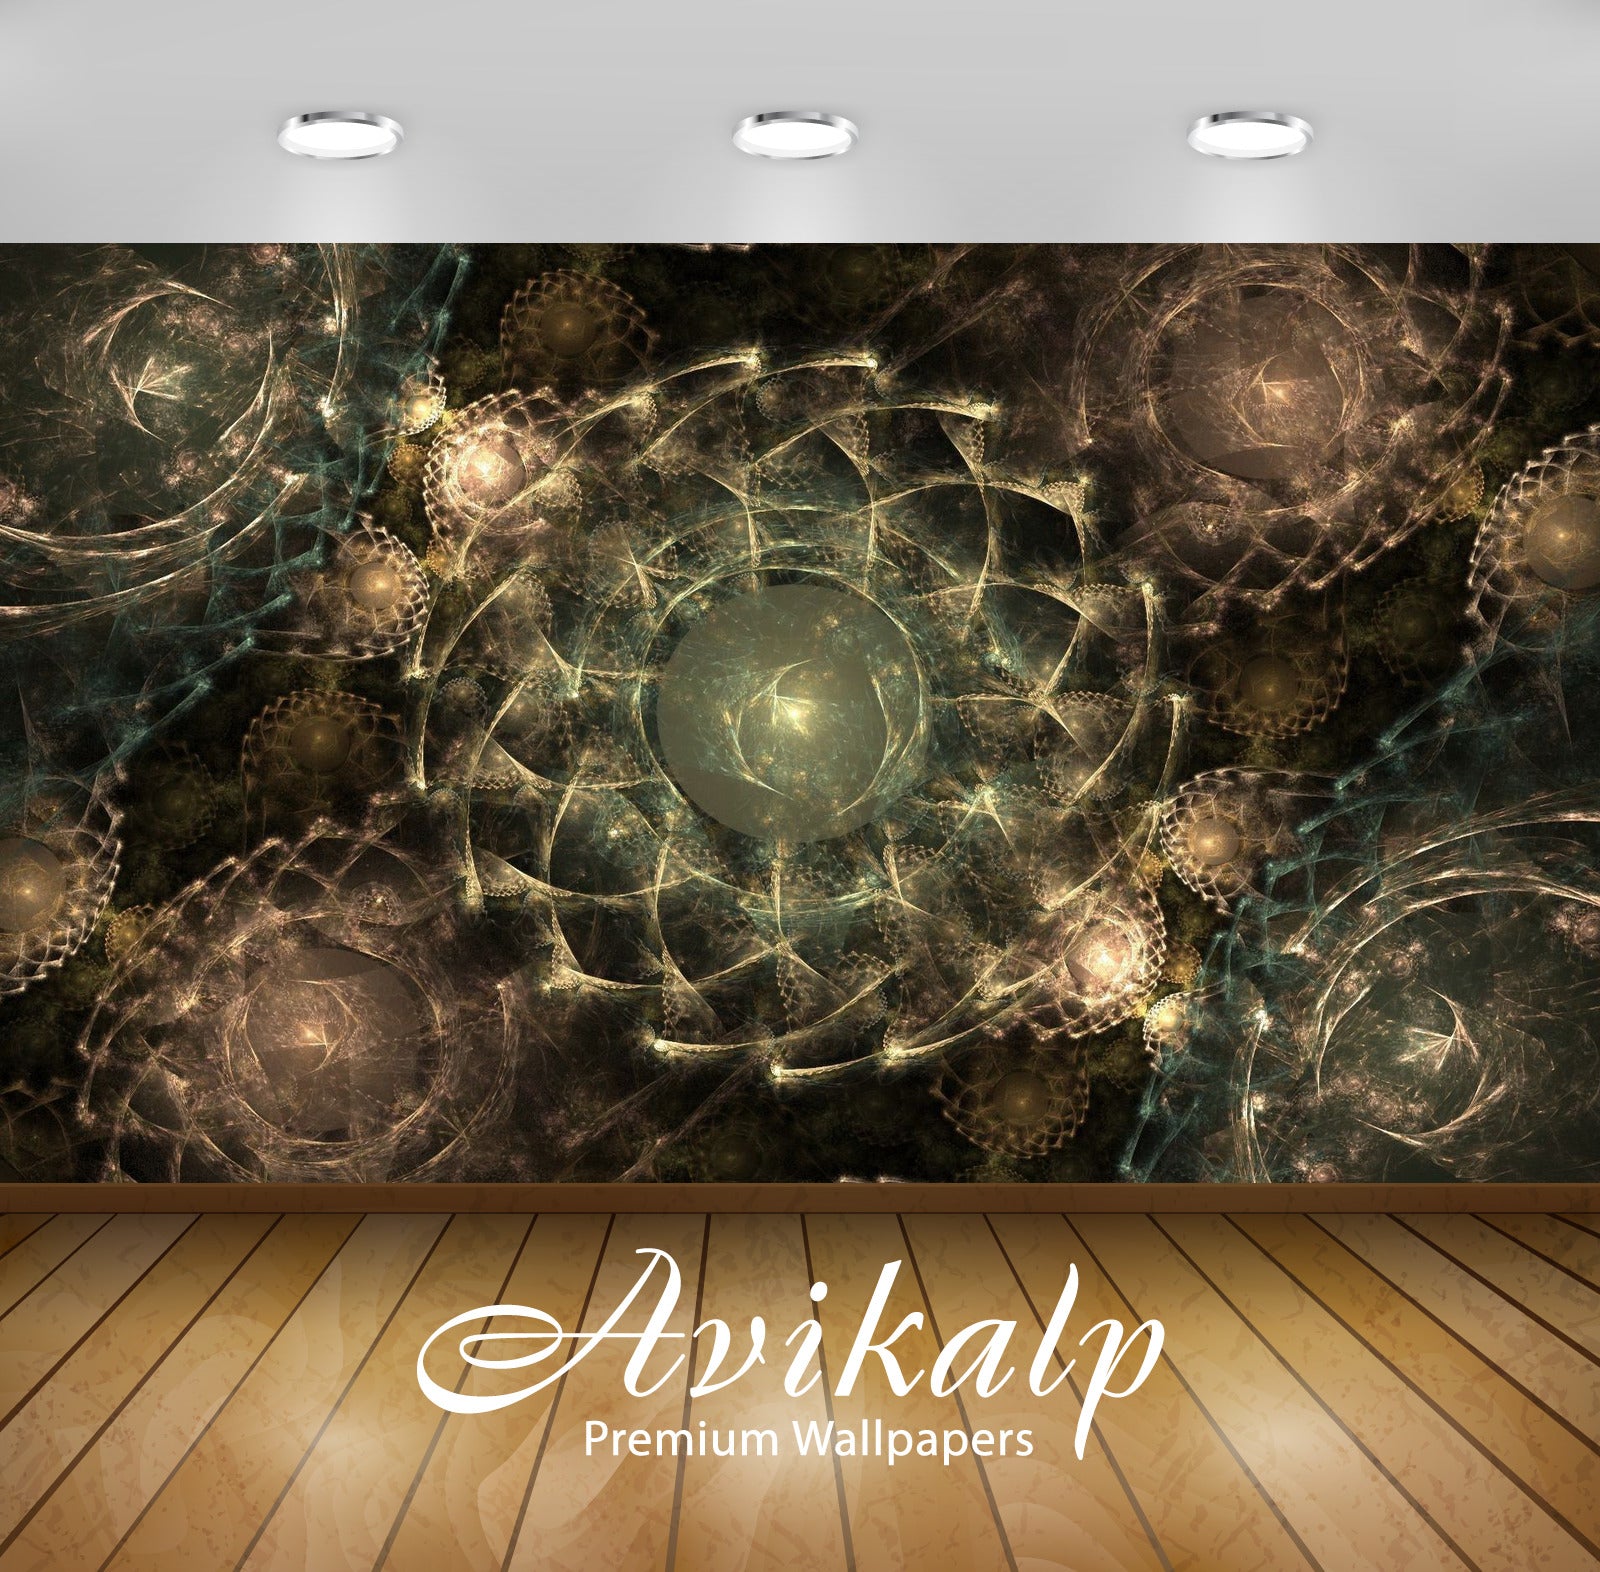 Avikalp Exclusive Awi4357 Fractal Circles Full HD Wallpapers for Living room, Hall, Kids Room, Kitch